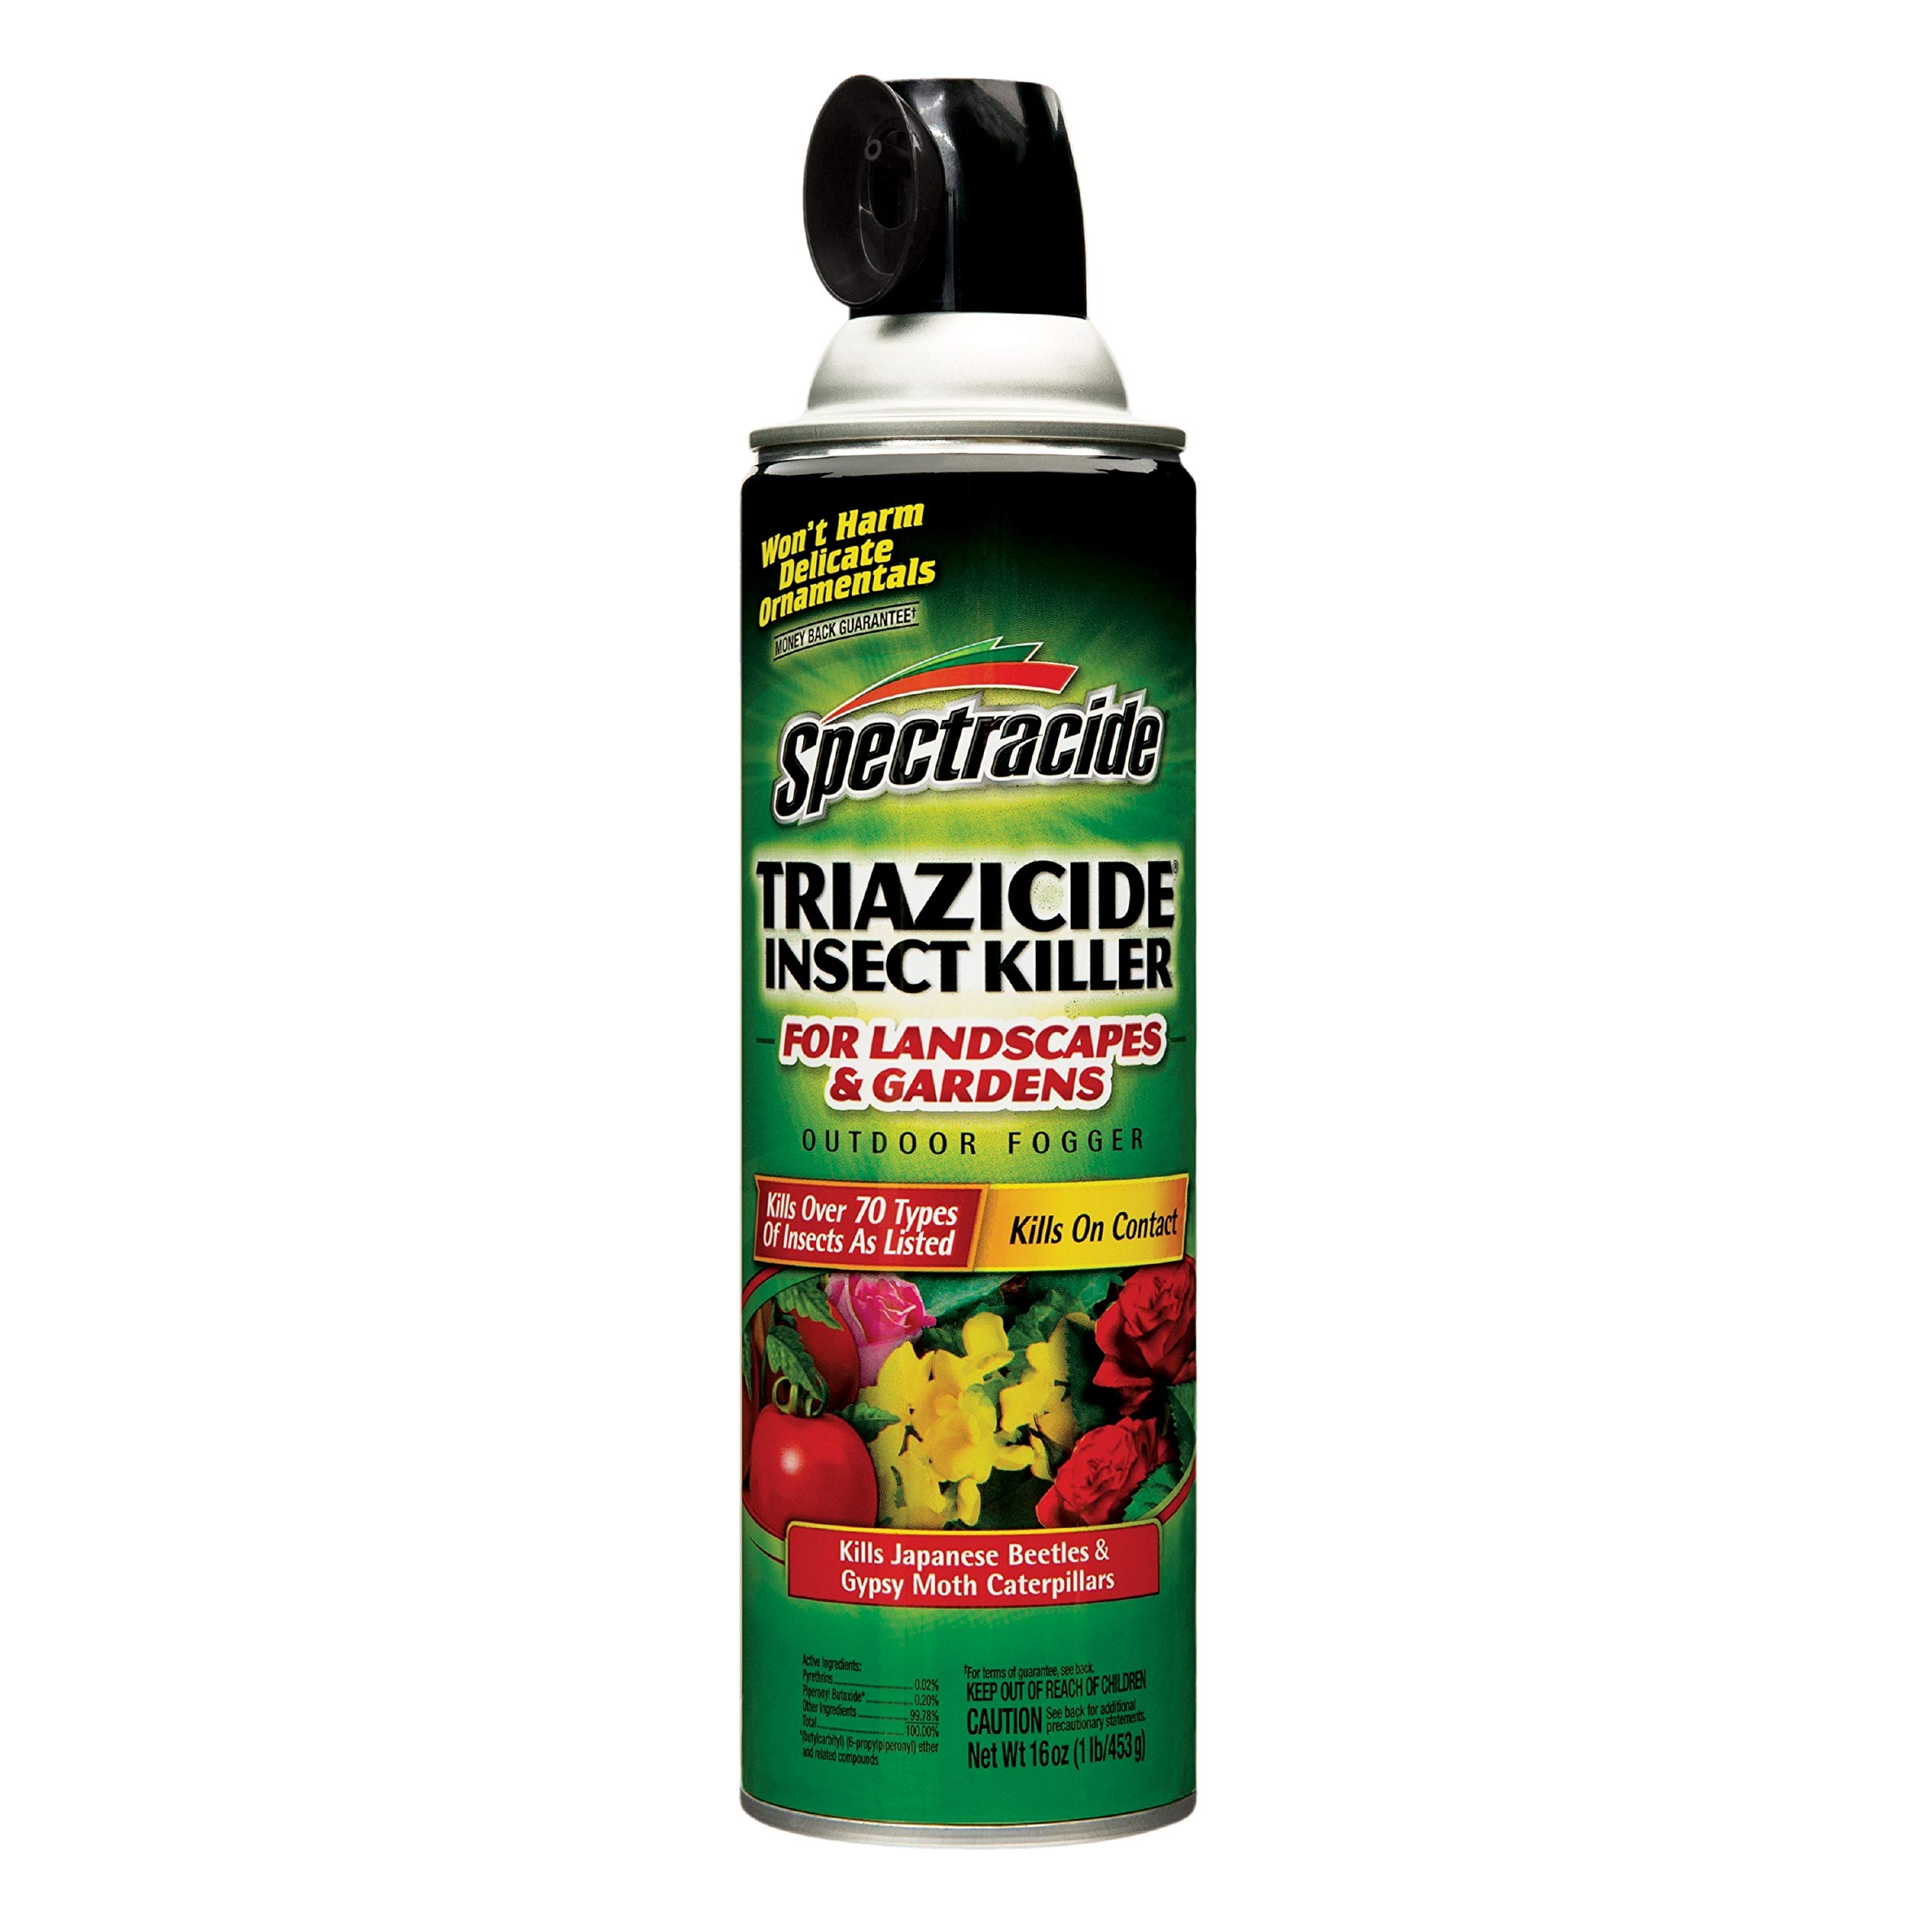 16-Ounce Spectracide Triazicide Insect Killer for Landscapes & Gardens $3.14 + Free Shipping w/ Prime or on $35+